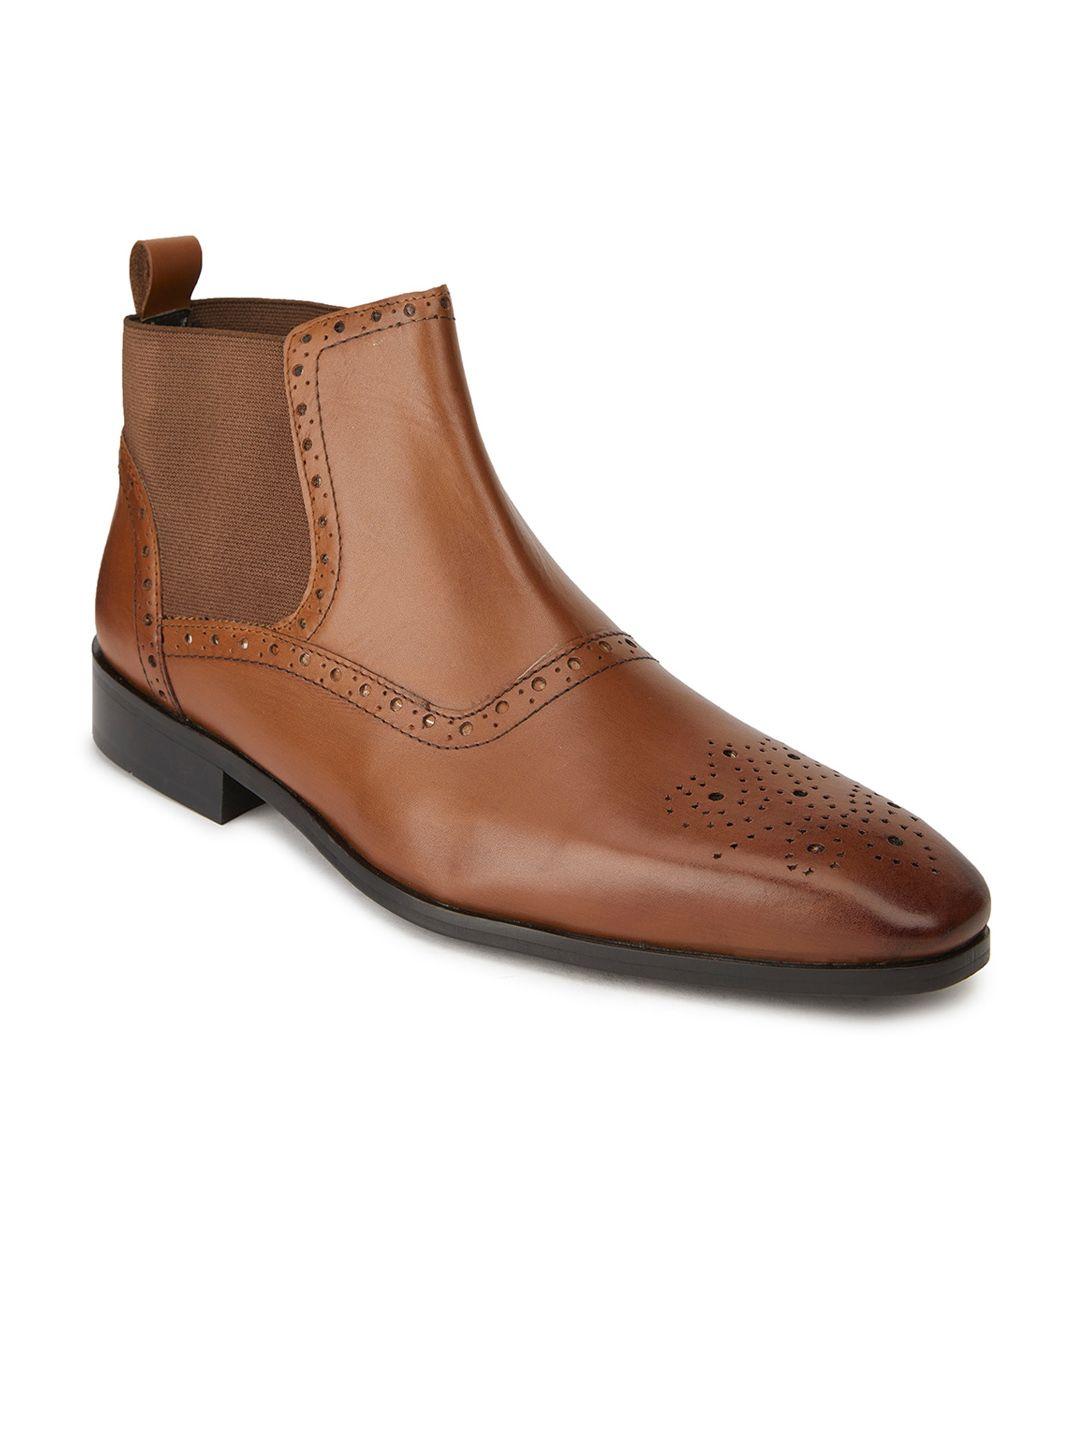 hats off accessories men leather blocked mid-top chelsea boots